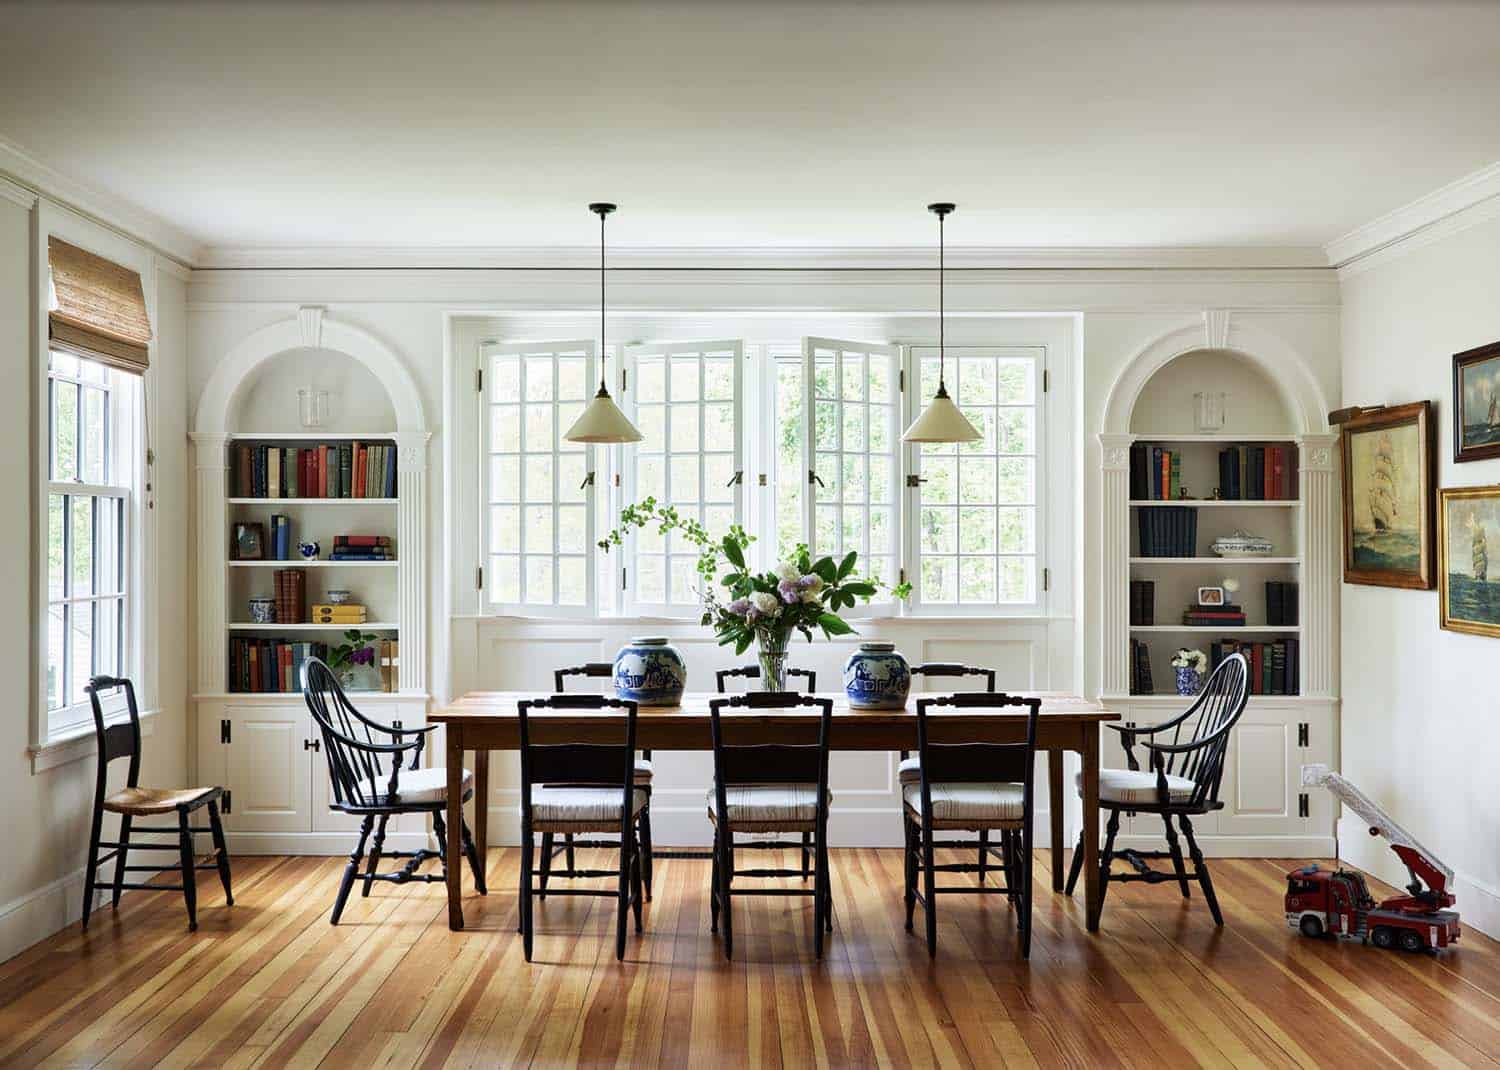 beach style dining room with built-in bookcases and paneled walls and windows